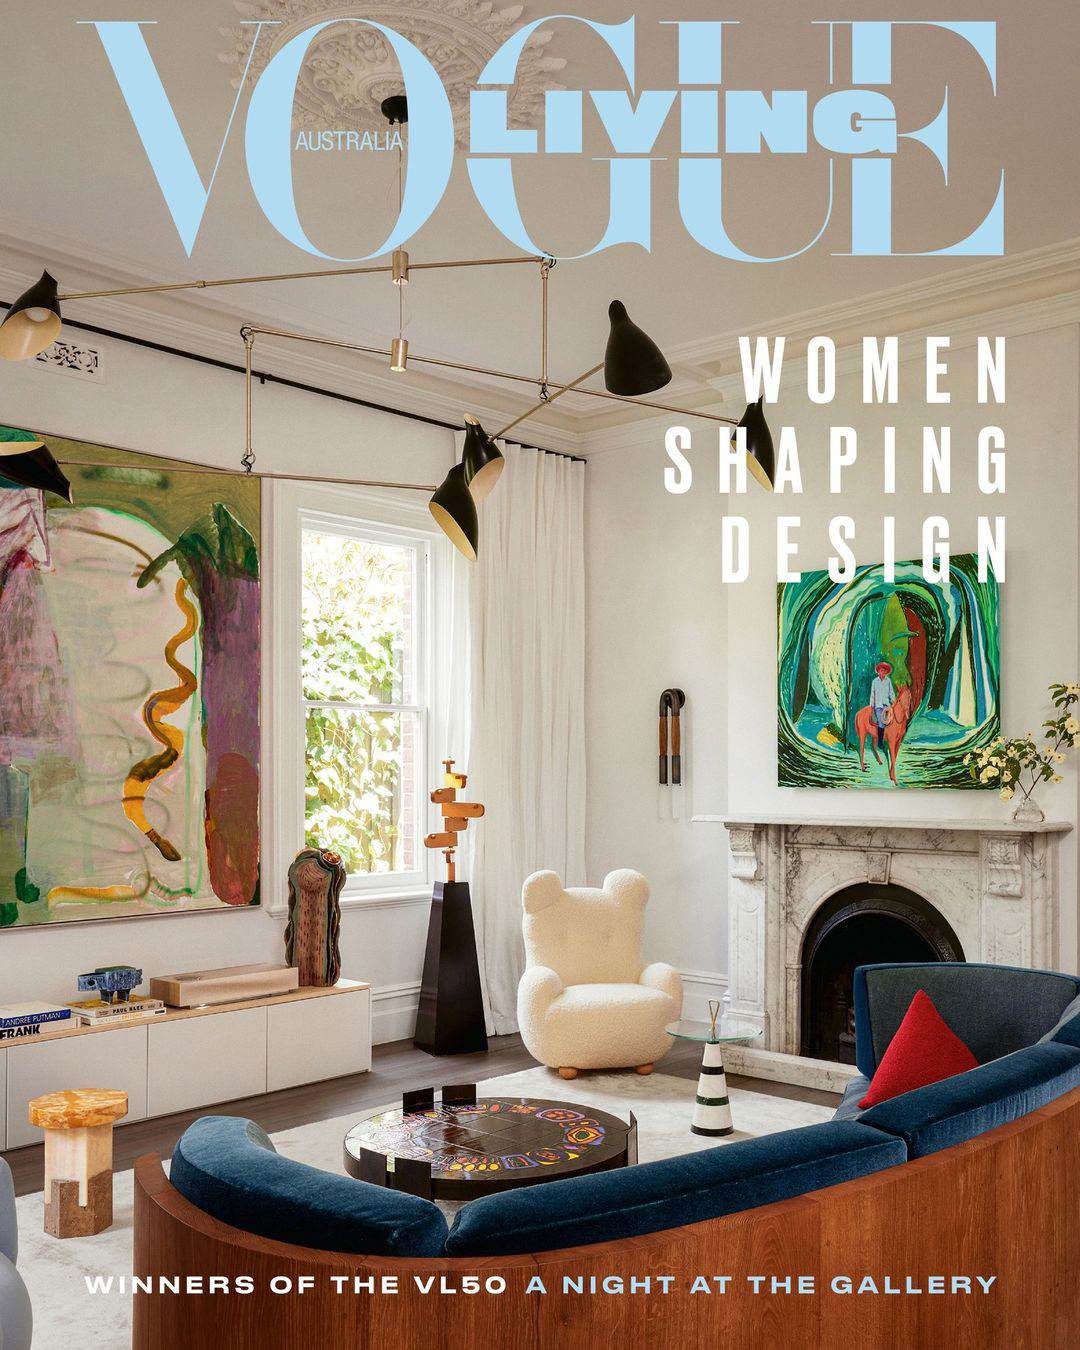 STATE OF THE ART - VOGUE LIVING